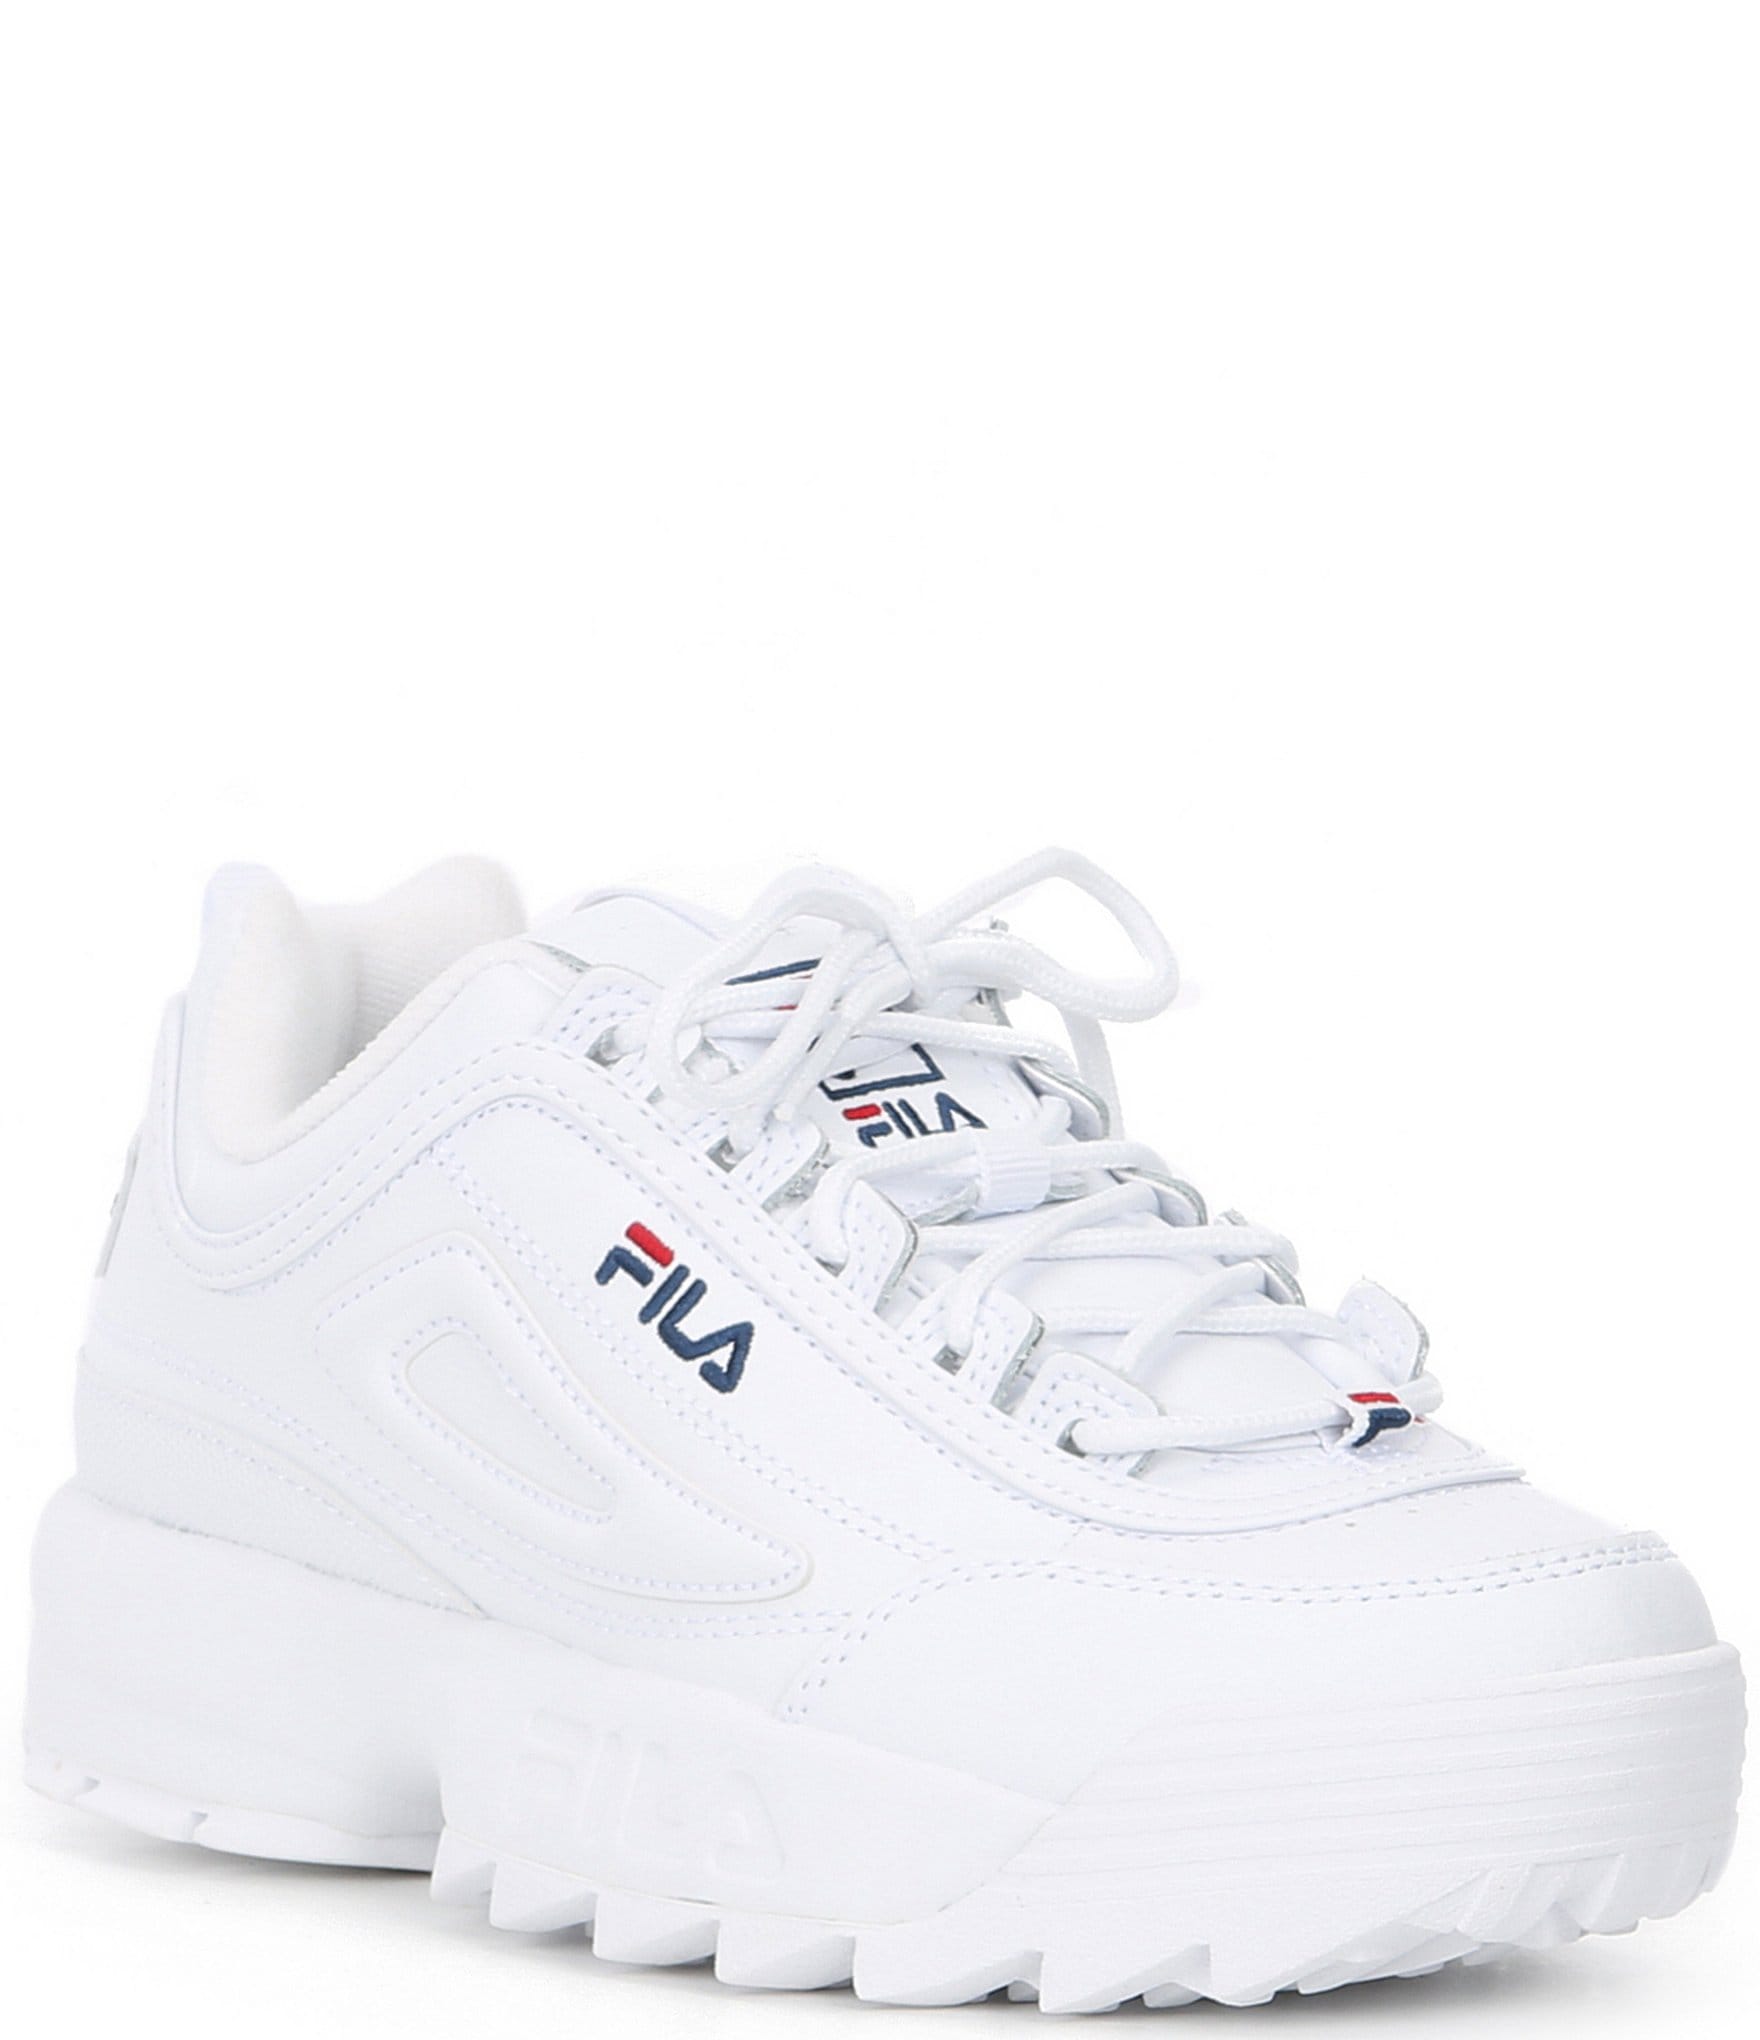 How Much Are Womens Fila Shoes?